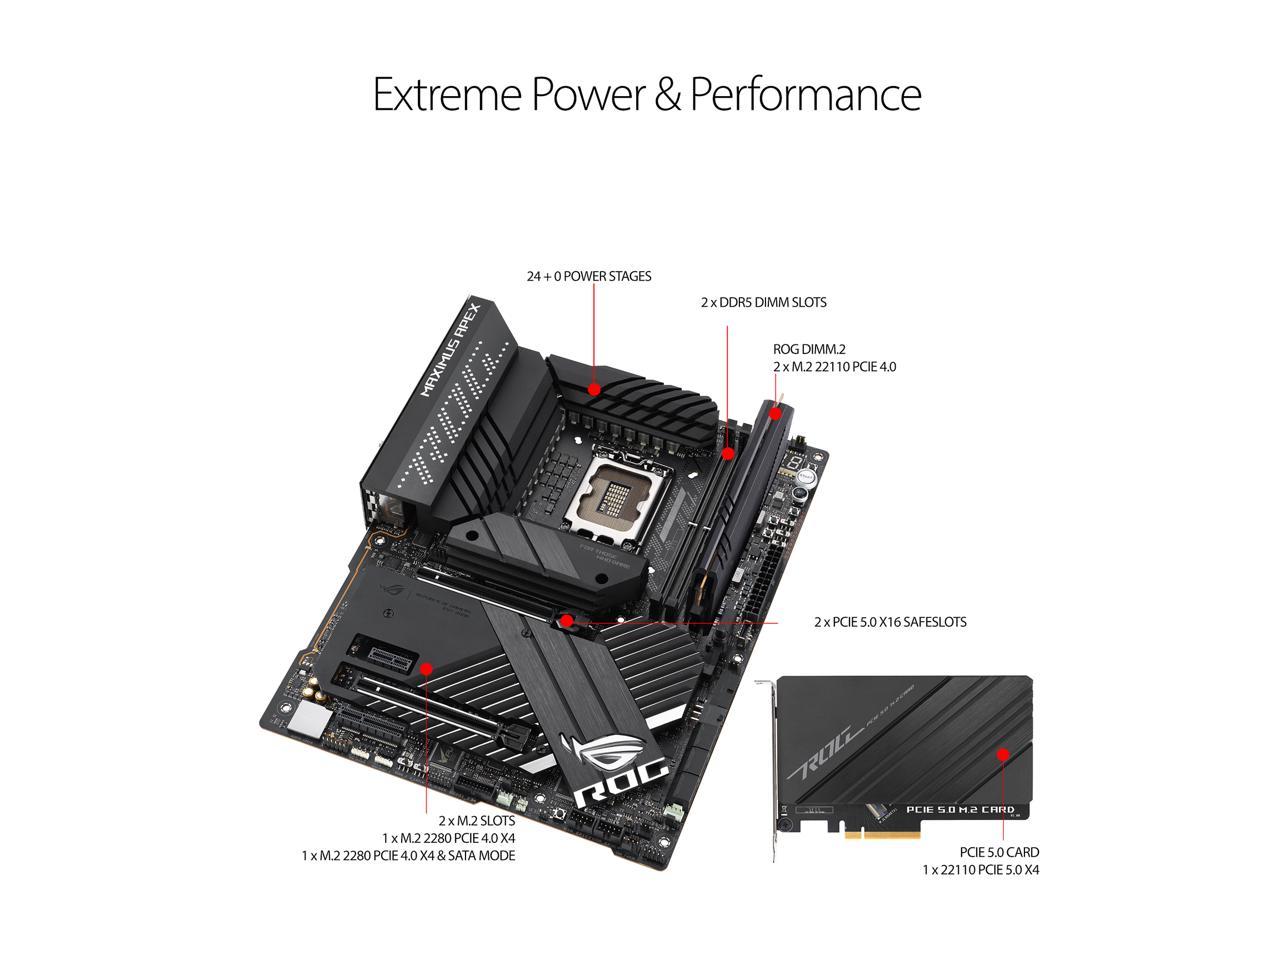 ASUS ROG Maximus Z690 Apex LGA 1700 WiFi 6E Intel 12th Gen ATX gaming motherboard PCIe 5.0,DDR5,24 power stages,DDR5,5x M.2,PCIe 5.0 M.2,USB 3.2 Gen 2x2 front-panel connector,Hyper M.2 Card bundled